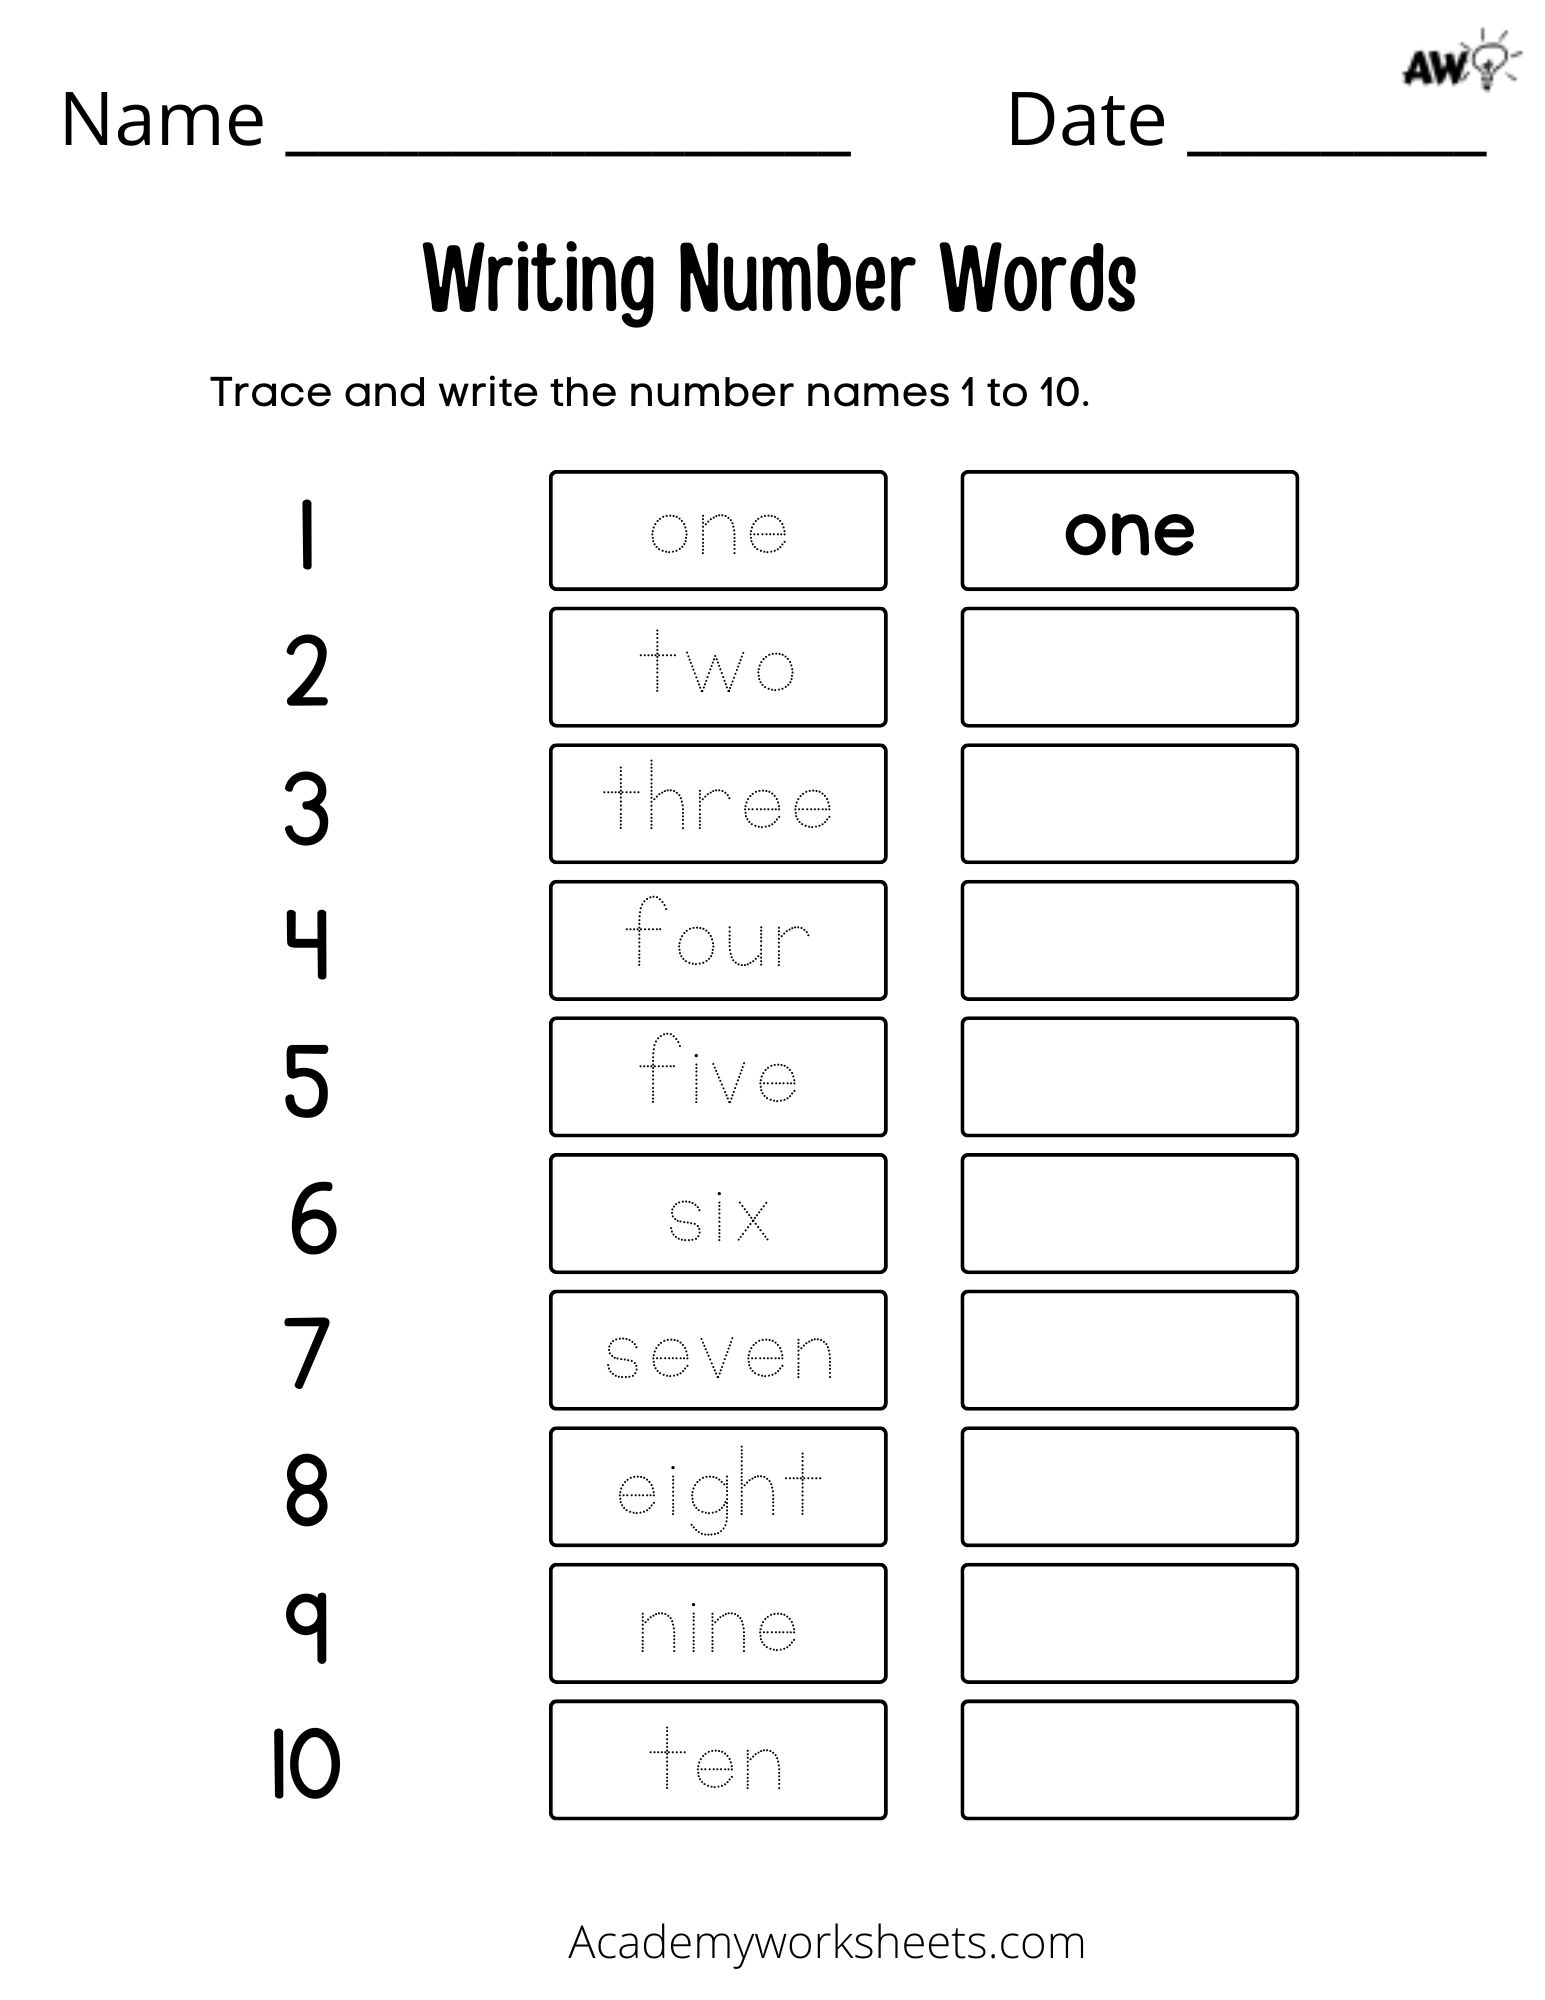 Counting in Words - Write in Words